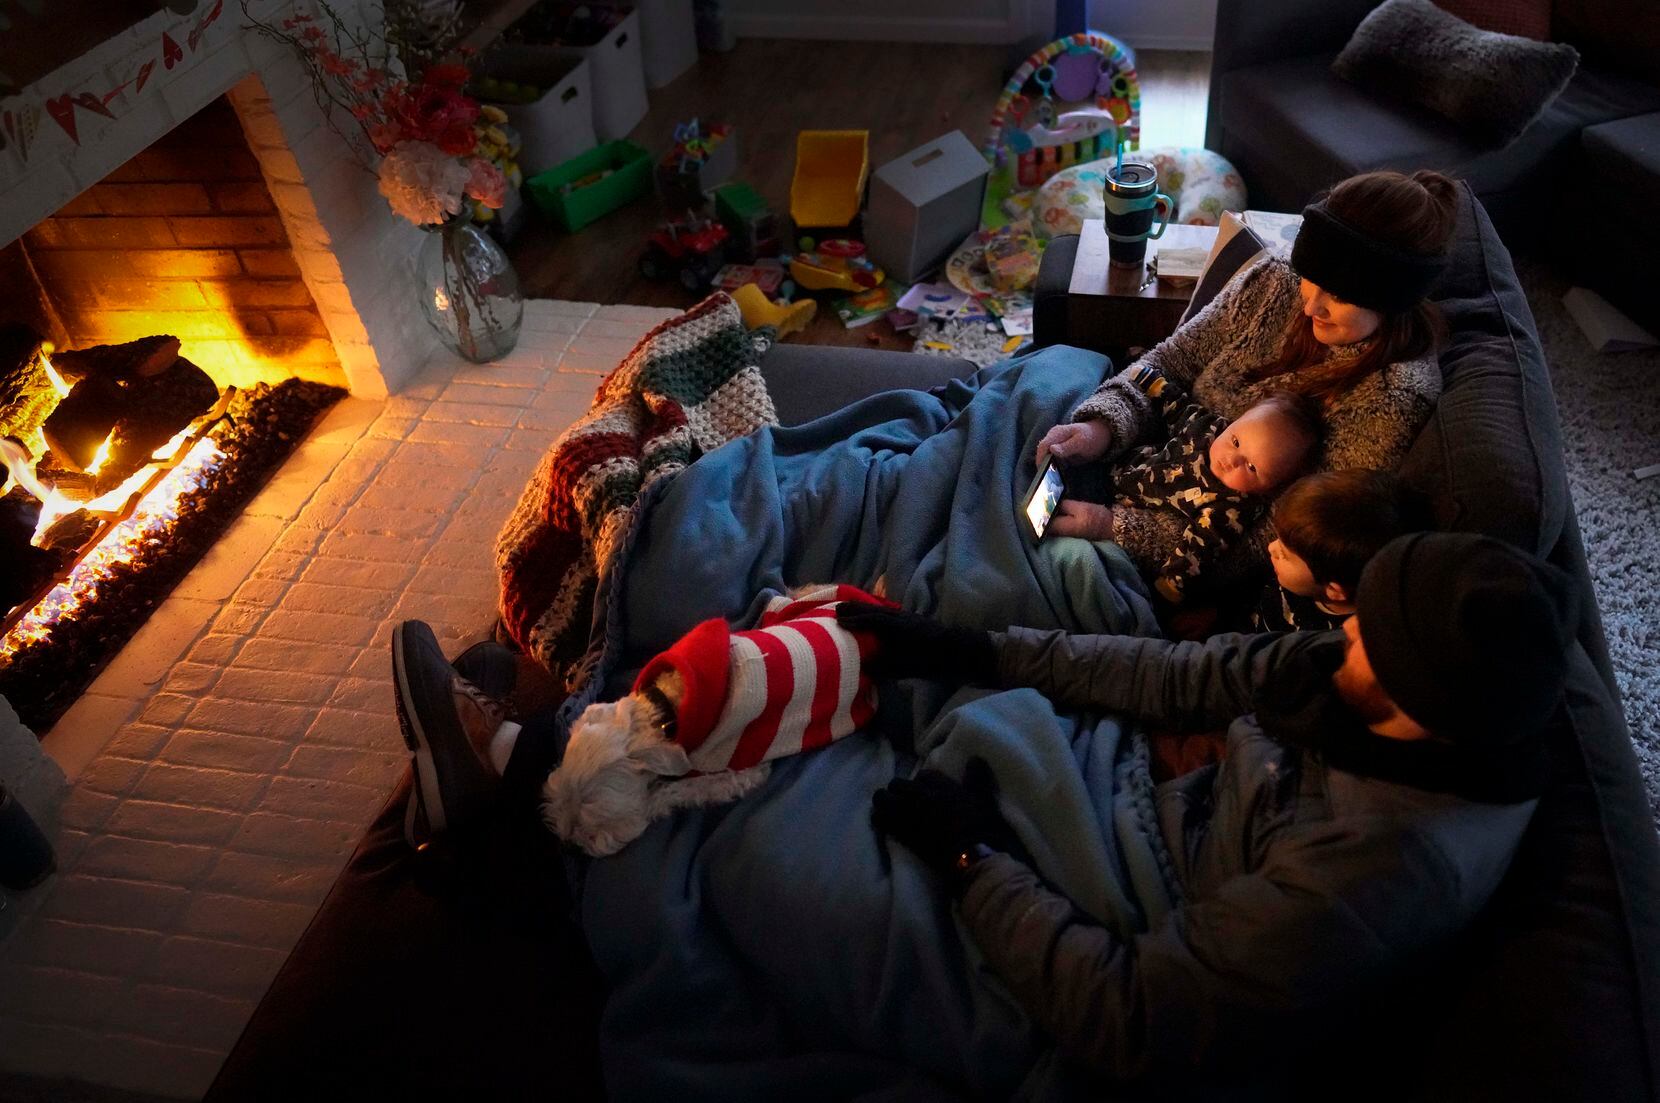 Dan Bryant and his wife, Anna, huddled by the fire with sons Benny, 3, and Sam, 12 weeks, and their dog Joey, who was wearing two doggie sweaters, in their home in Garland. The massive winter storm let the Bryants, along with millions of other Texans without power. 